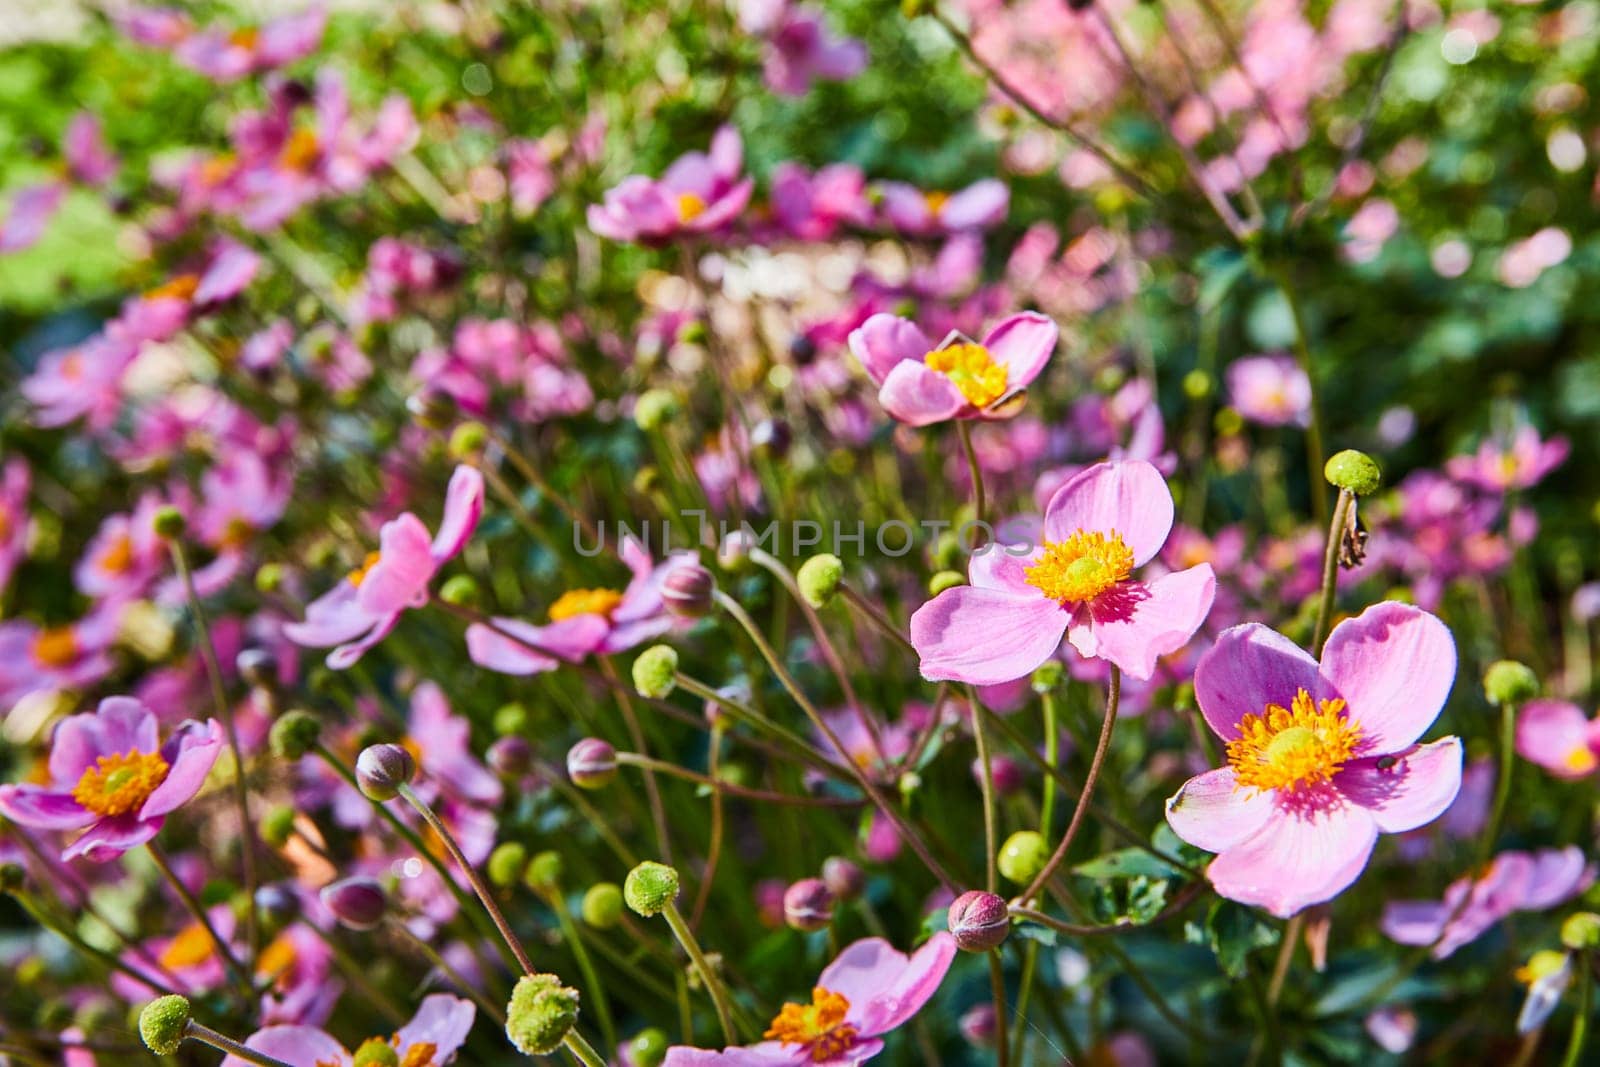 Vibrant Pink Anemones in Bloom with Natural Light by njproductions